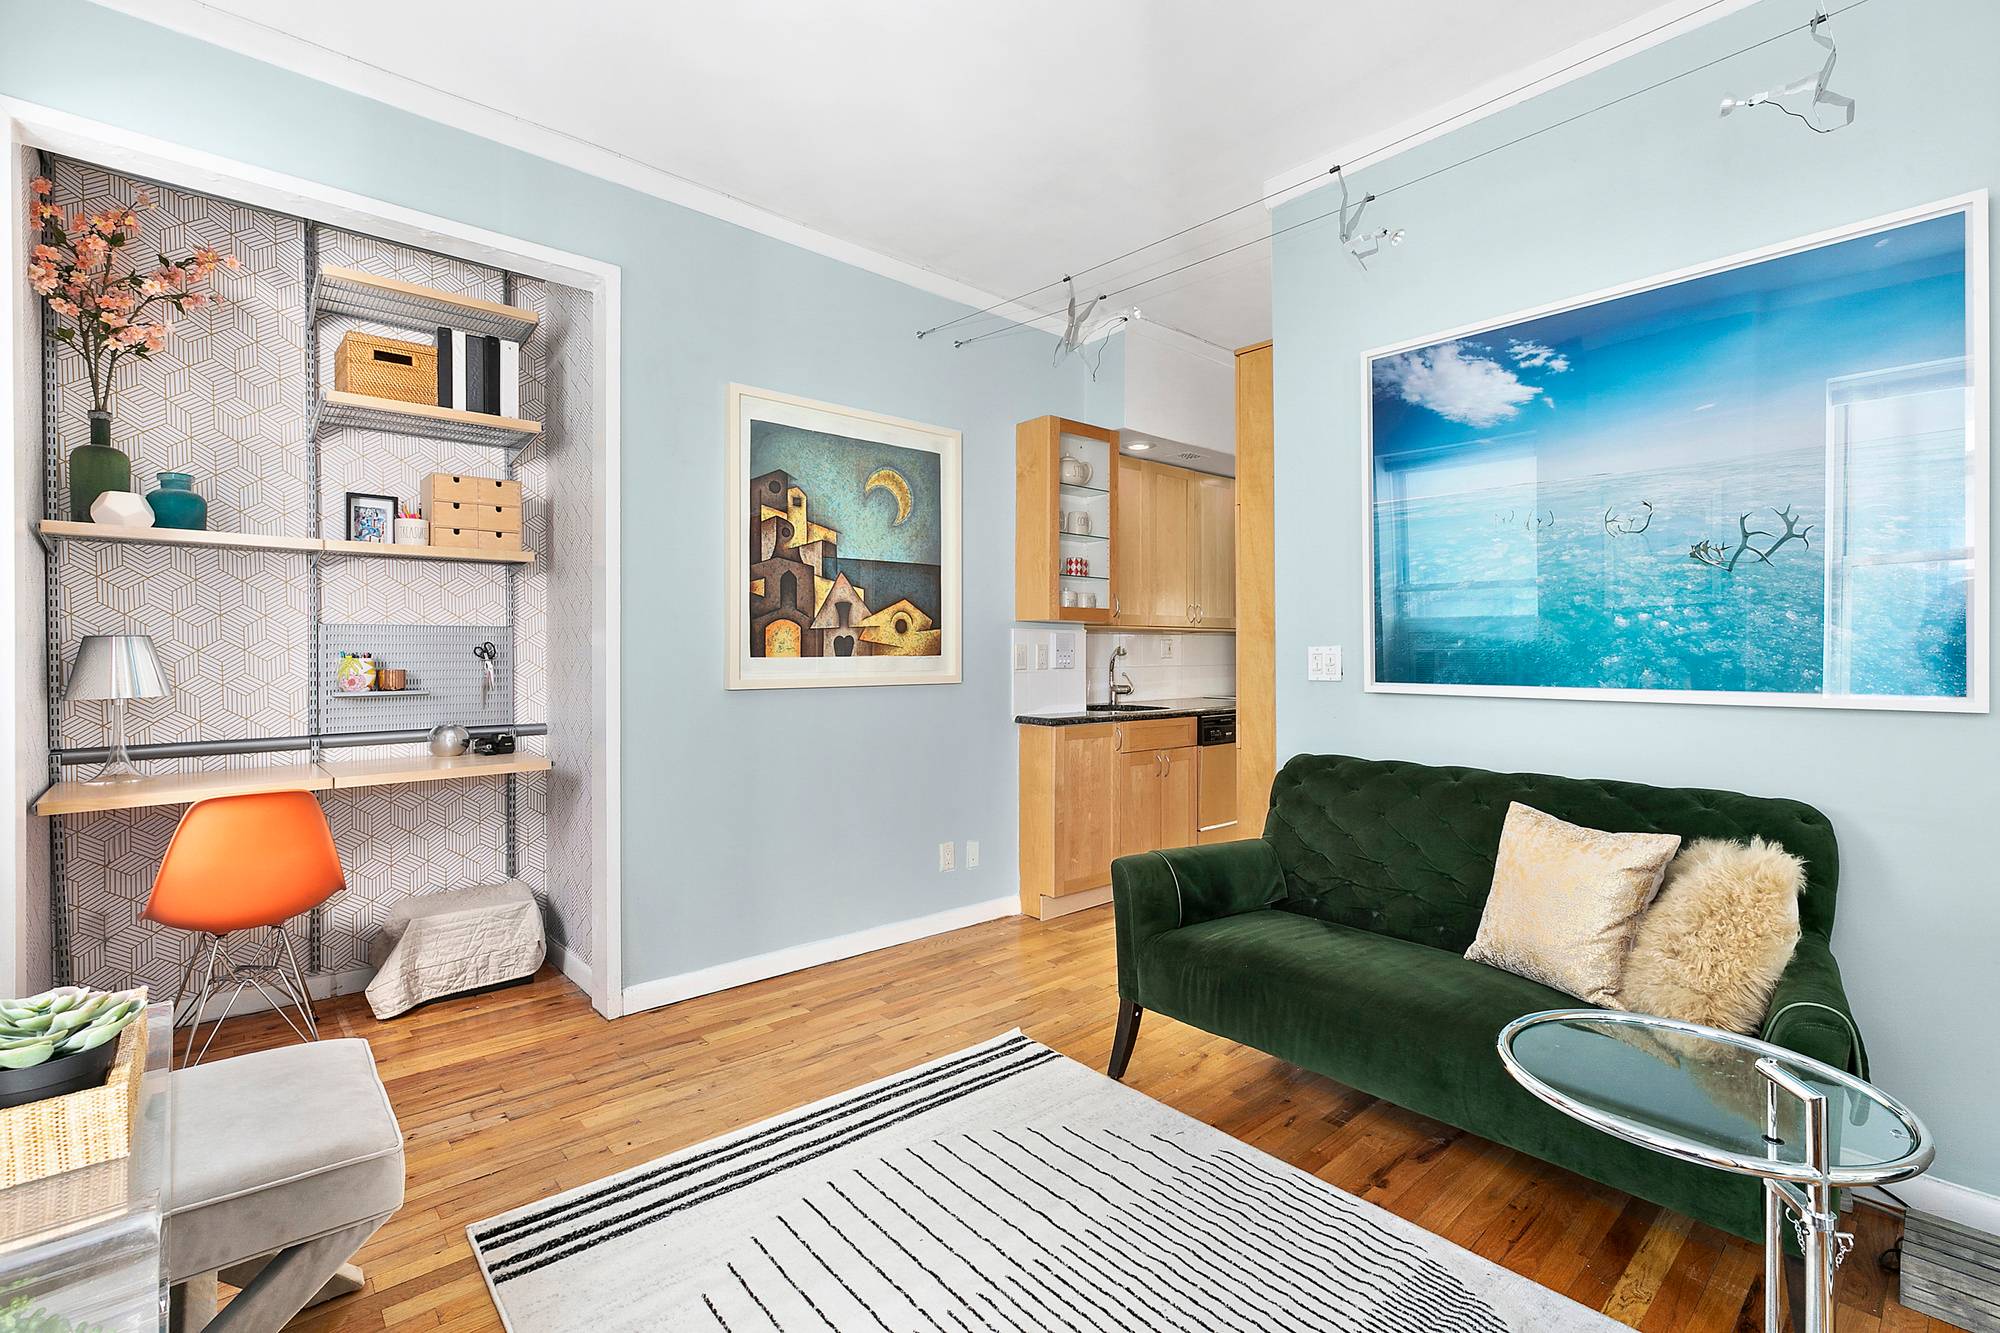 Nestled on the most picturesque block in Gramercy, Apartment 5E at 26 Gramercy Park South is a smartly laid out junior 1 bedroom, offering 9 foot ceilings, a generously sized ...